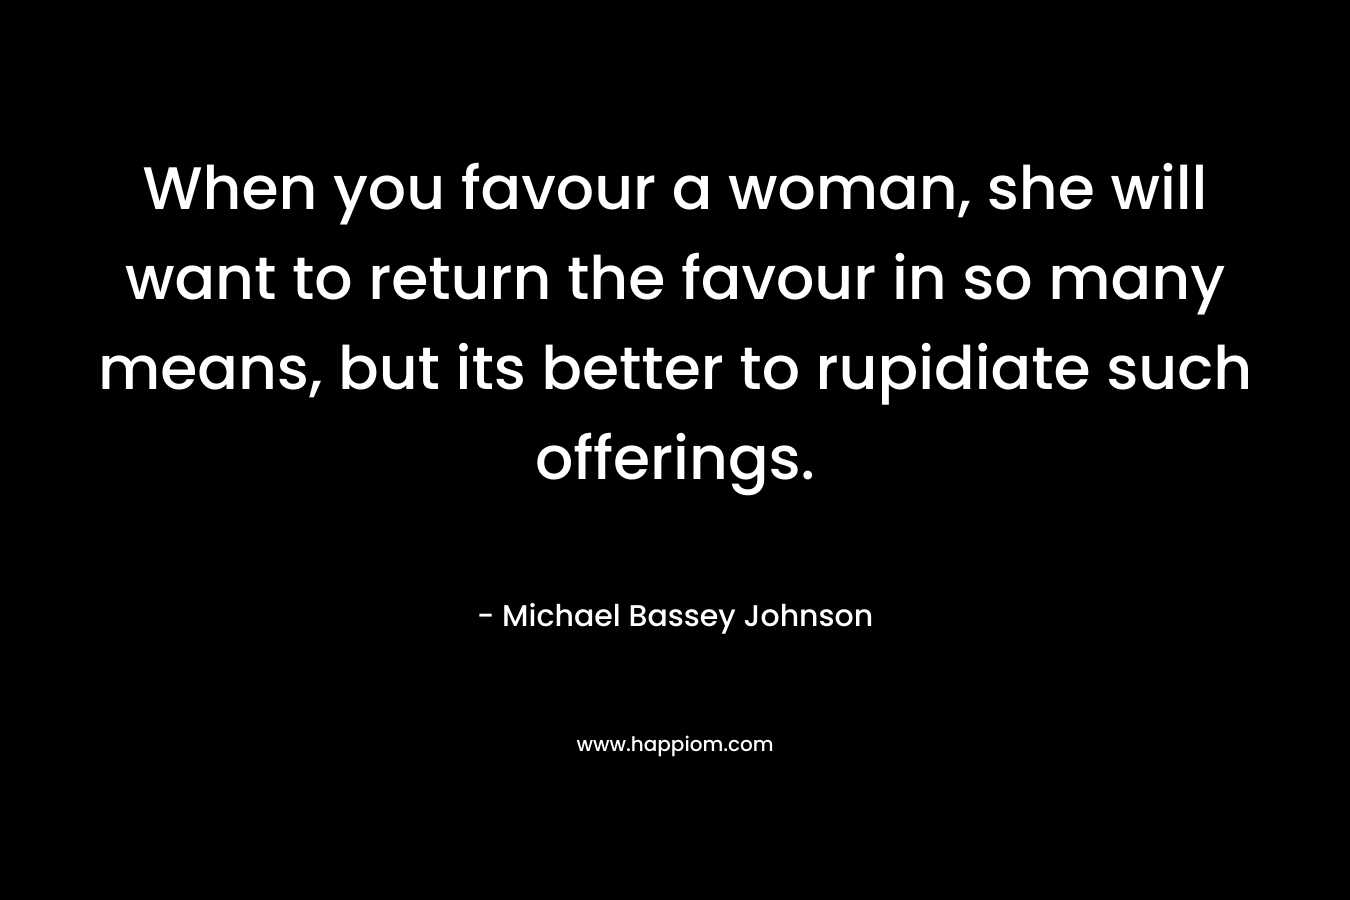 When you favour a woman, she will want to return the favour in so many means, but its better to rupidiate such offerings.